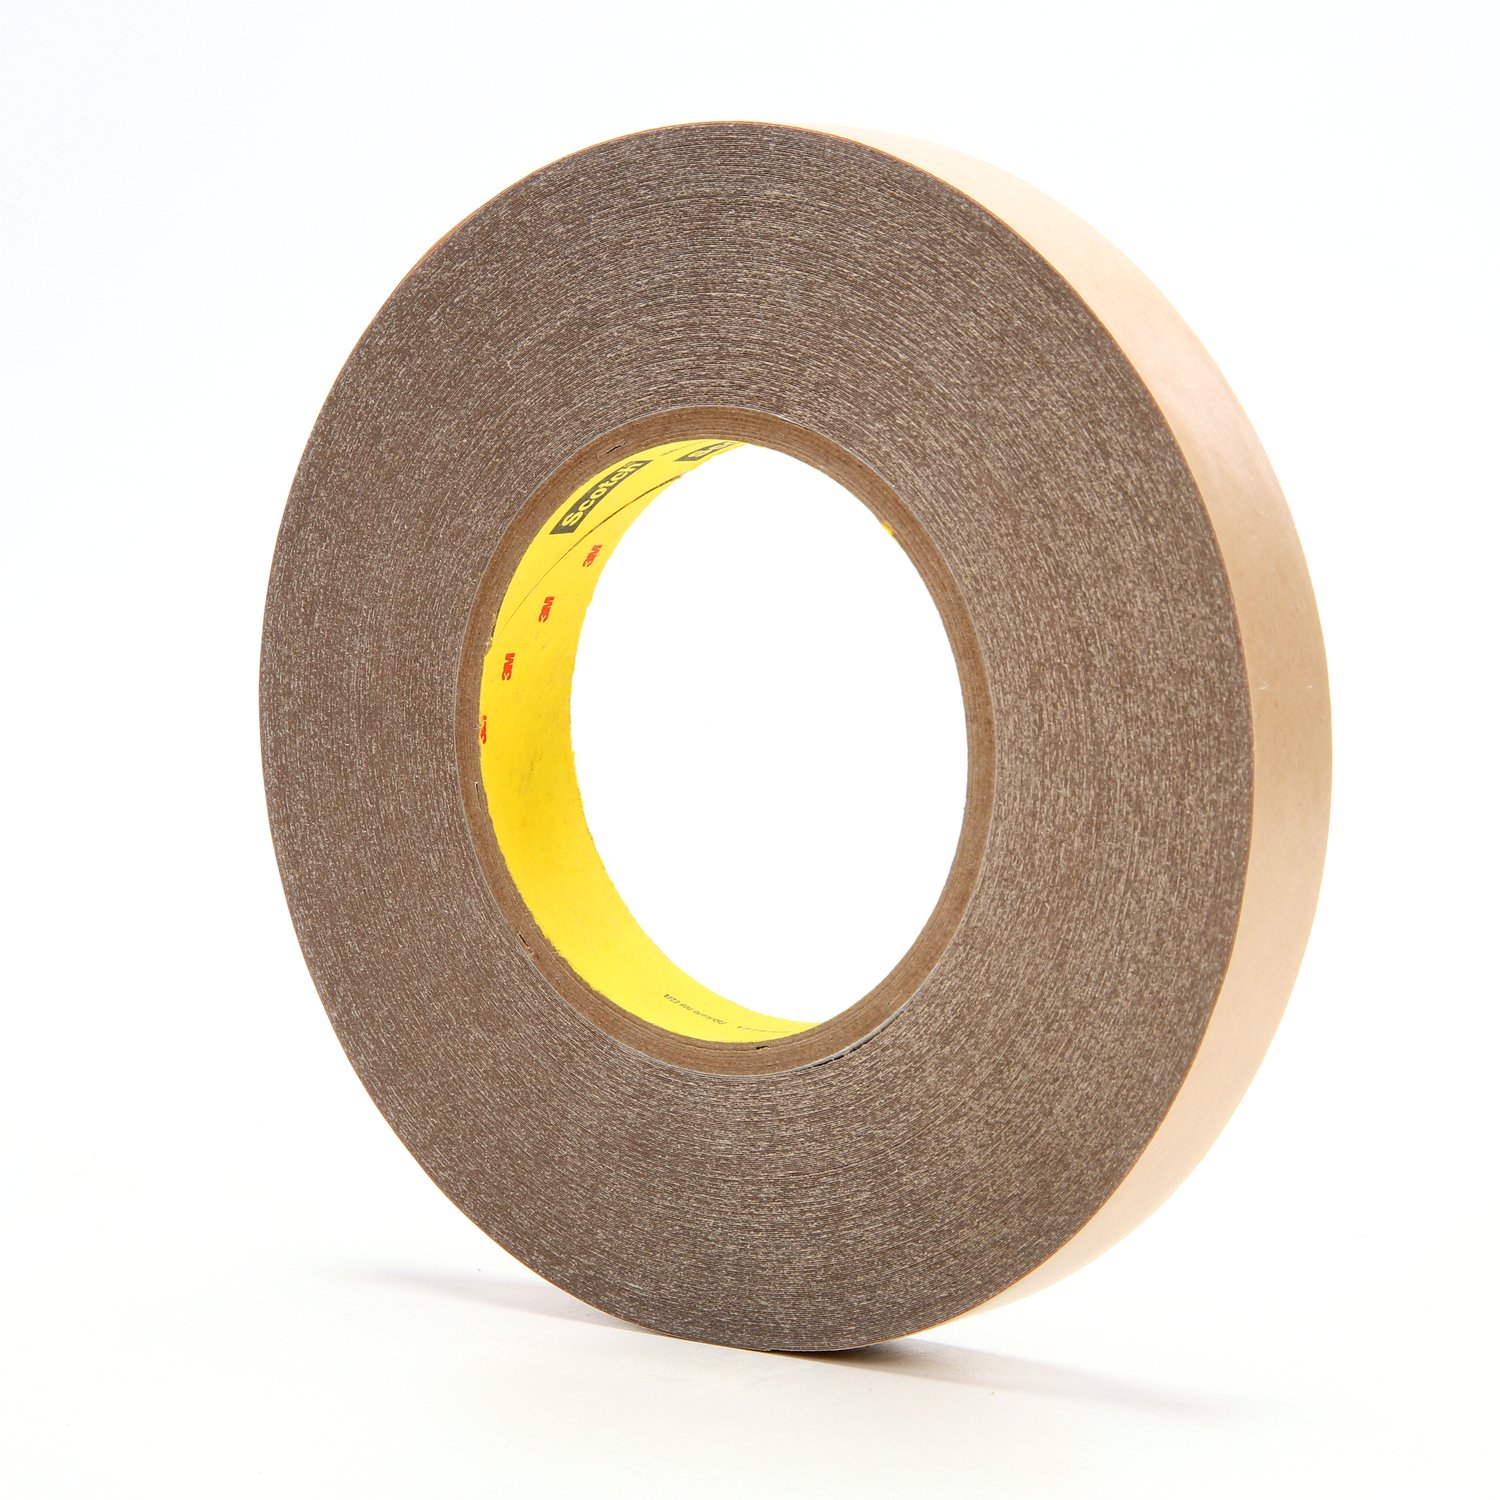 7000123385 - 3M Adhesive Transfer Tape 9485PC, Clear, 3/4 in x 60 yd, 5 mil, 48
rolls per case